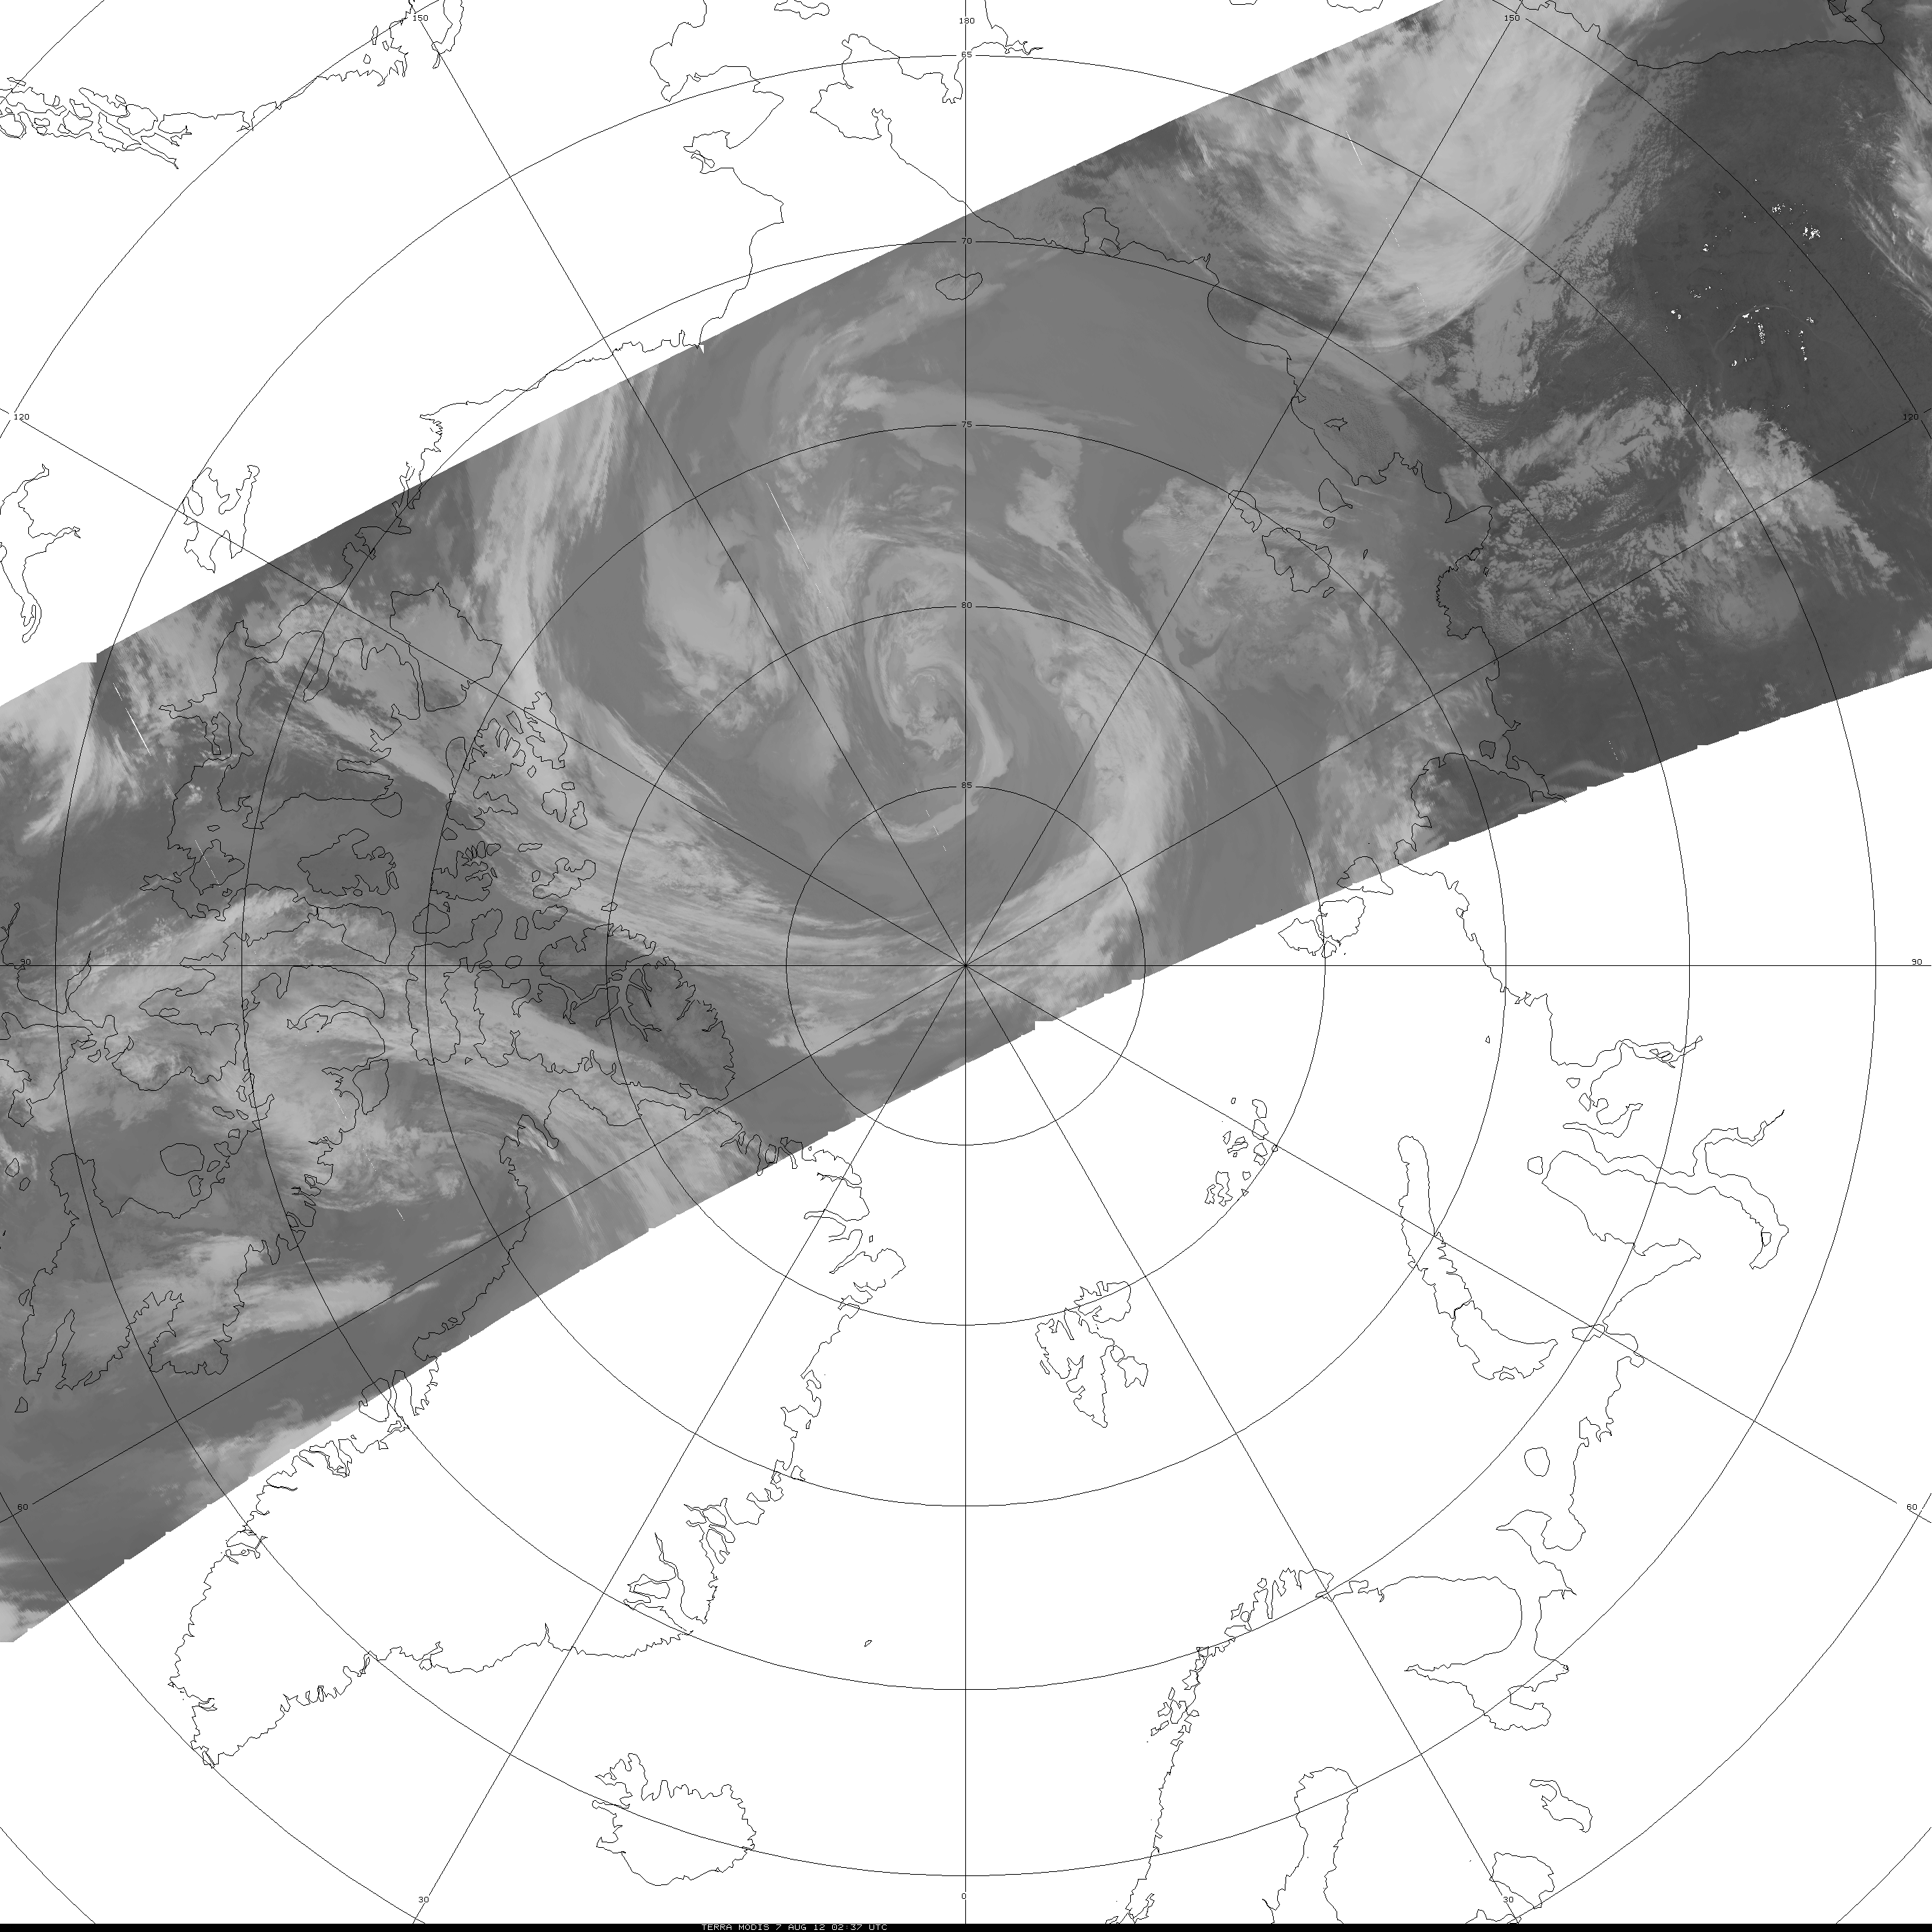 Terra MODIS 11.0 Âµm IR channel images (click image to play animation)